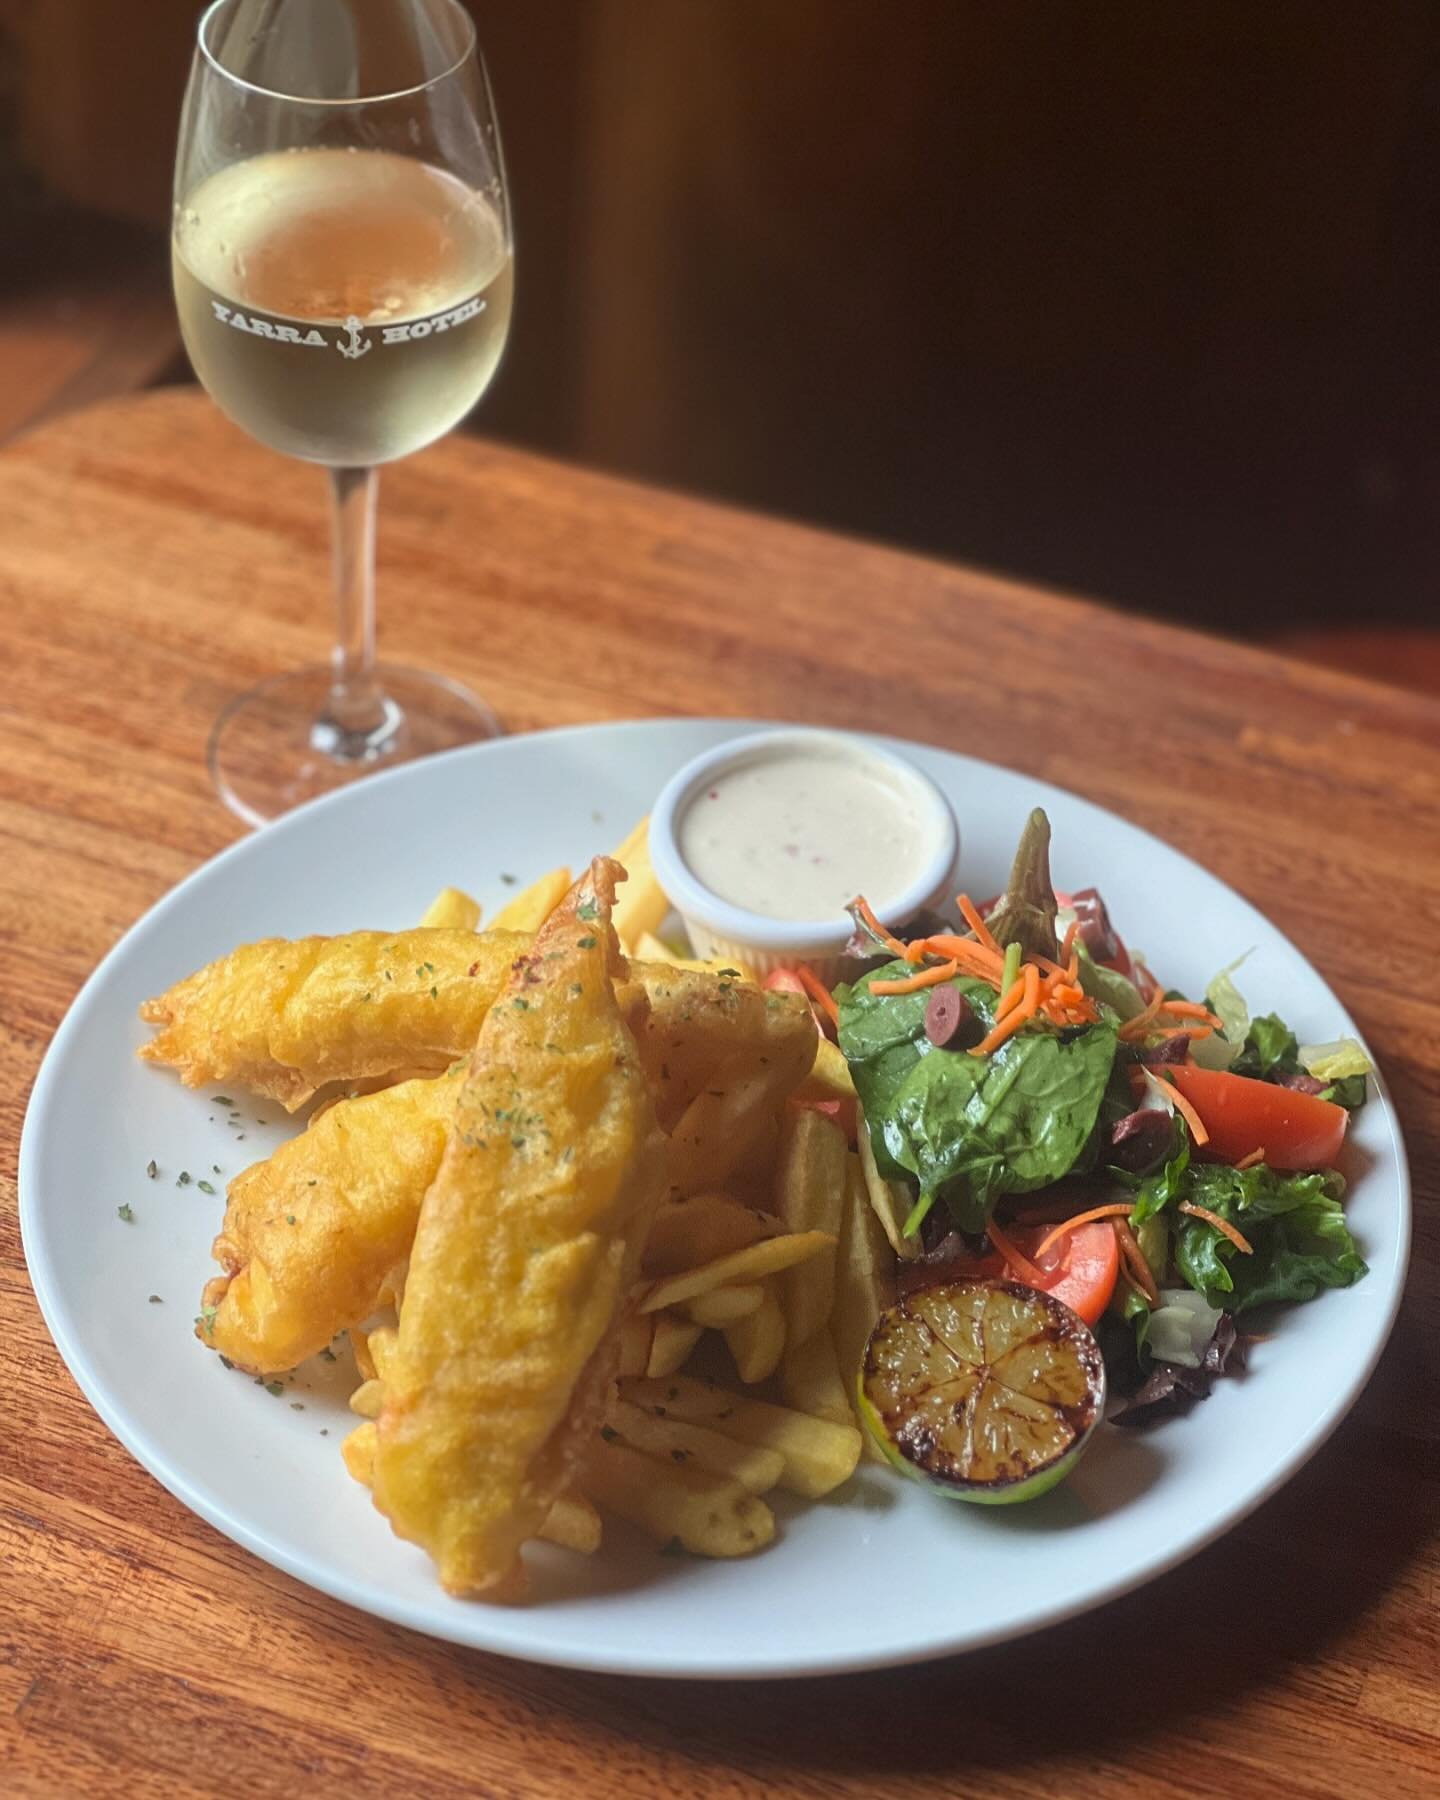 A little something classic and special for mum this Sunday. Beer battered barramundi fillets with chips, garden salad, charred lime and tartare sauce. Delicious!